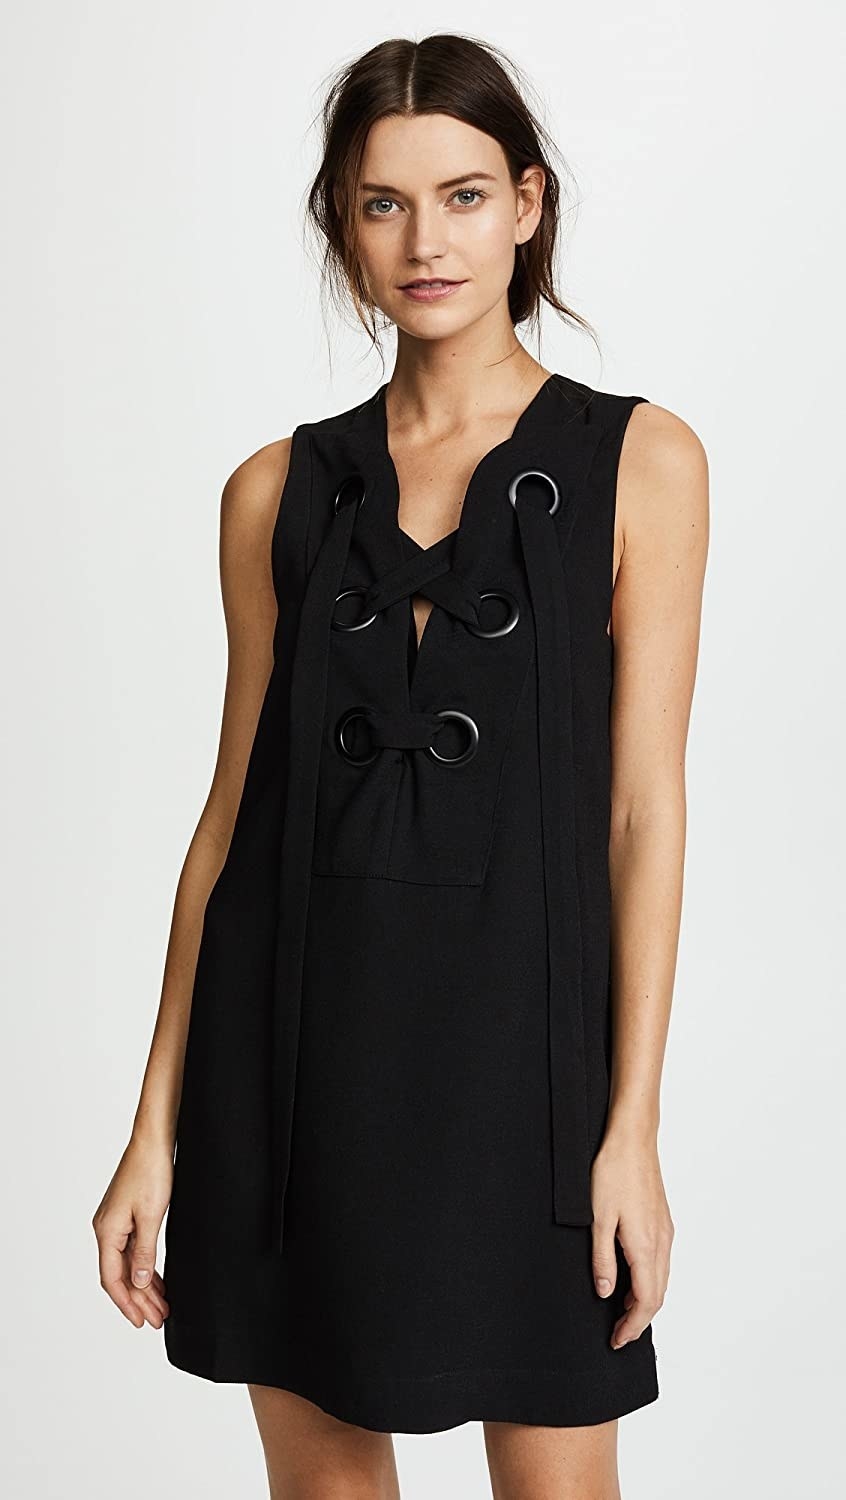 A model wearing the sleeveless dress with oversized sneaker-like lace-up detail at the neck in black